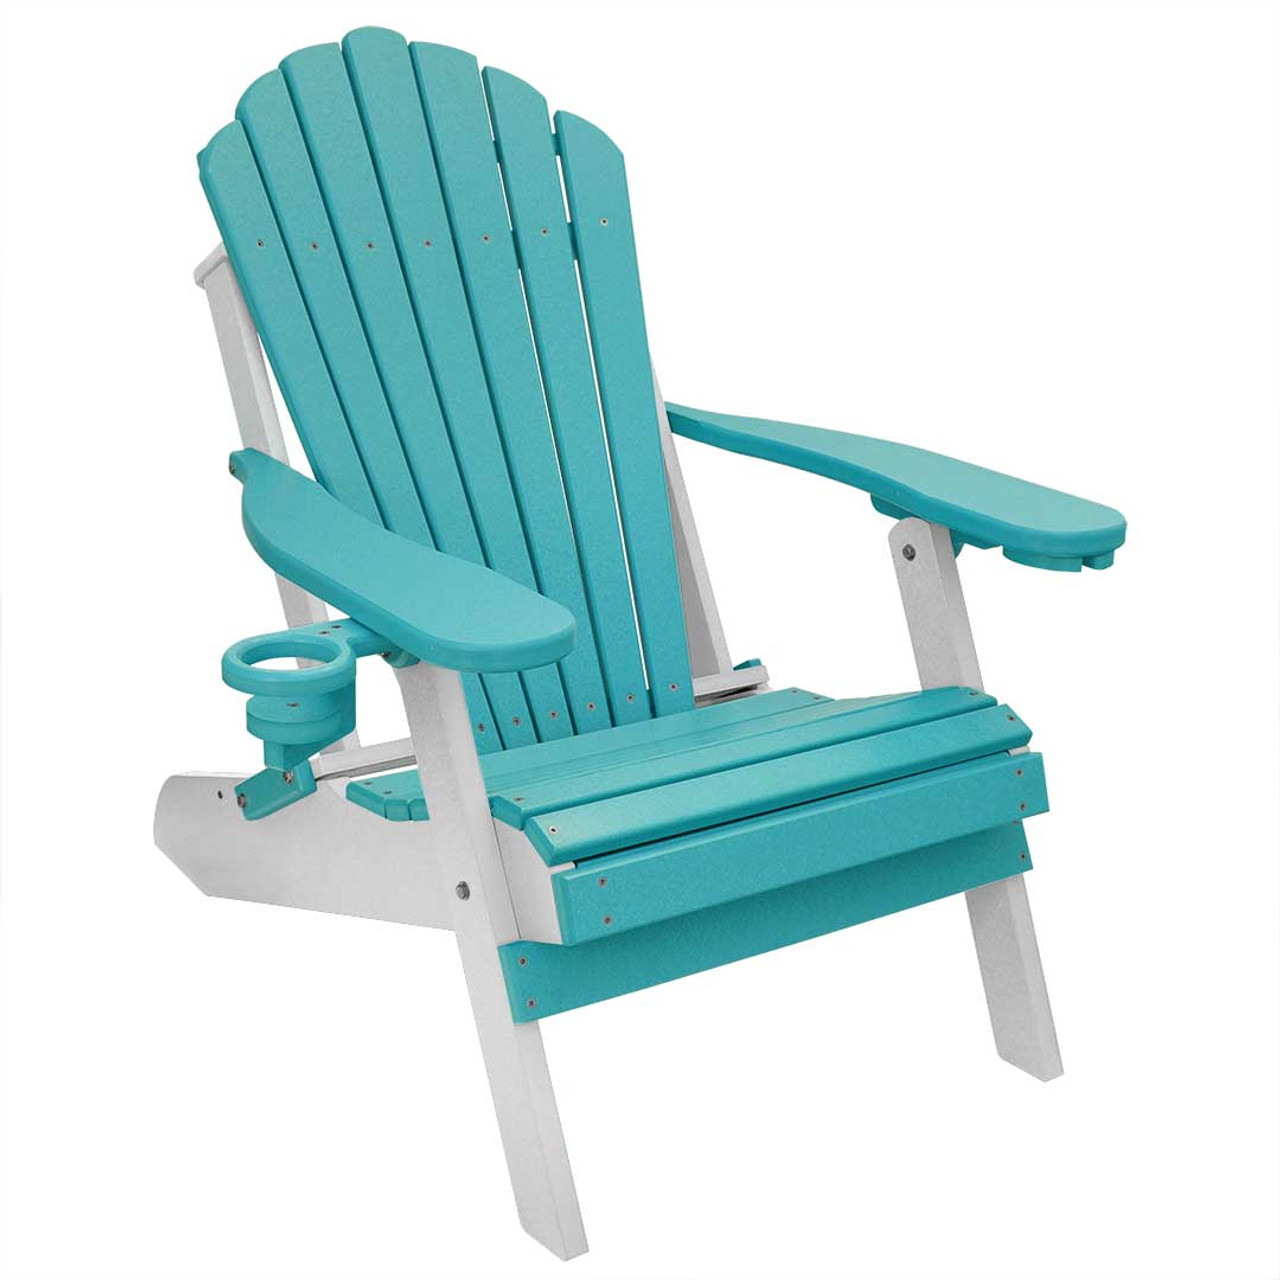 The 10 Best Adirondack Chairs That Balance Comfort And Durability